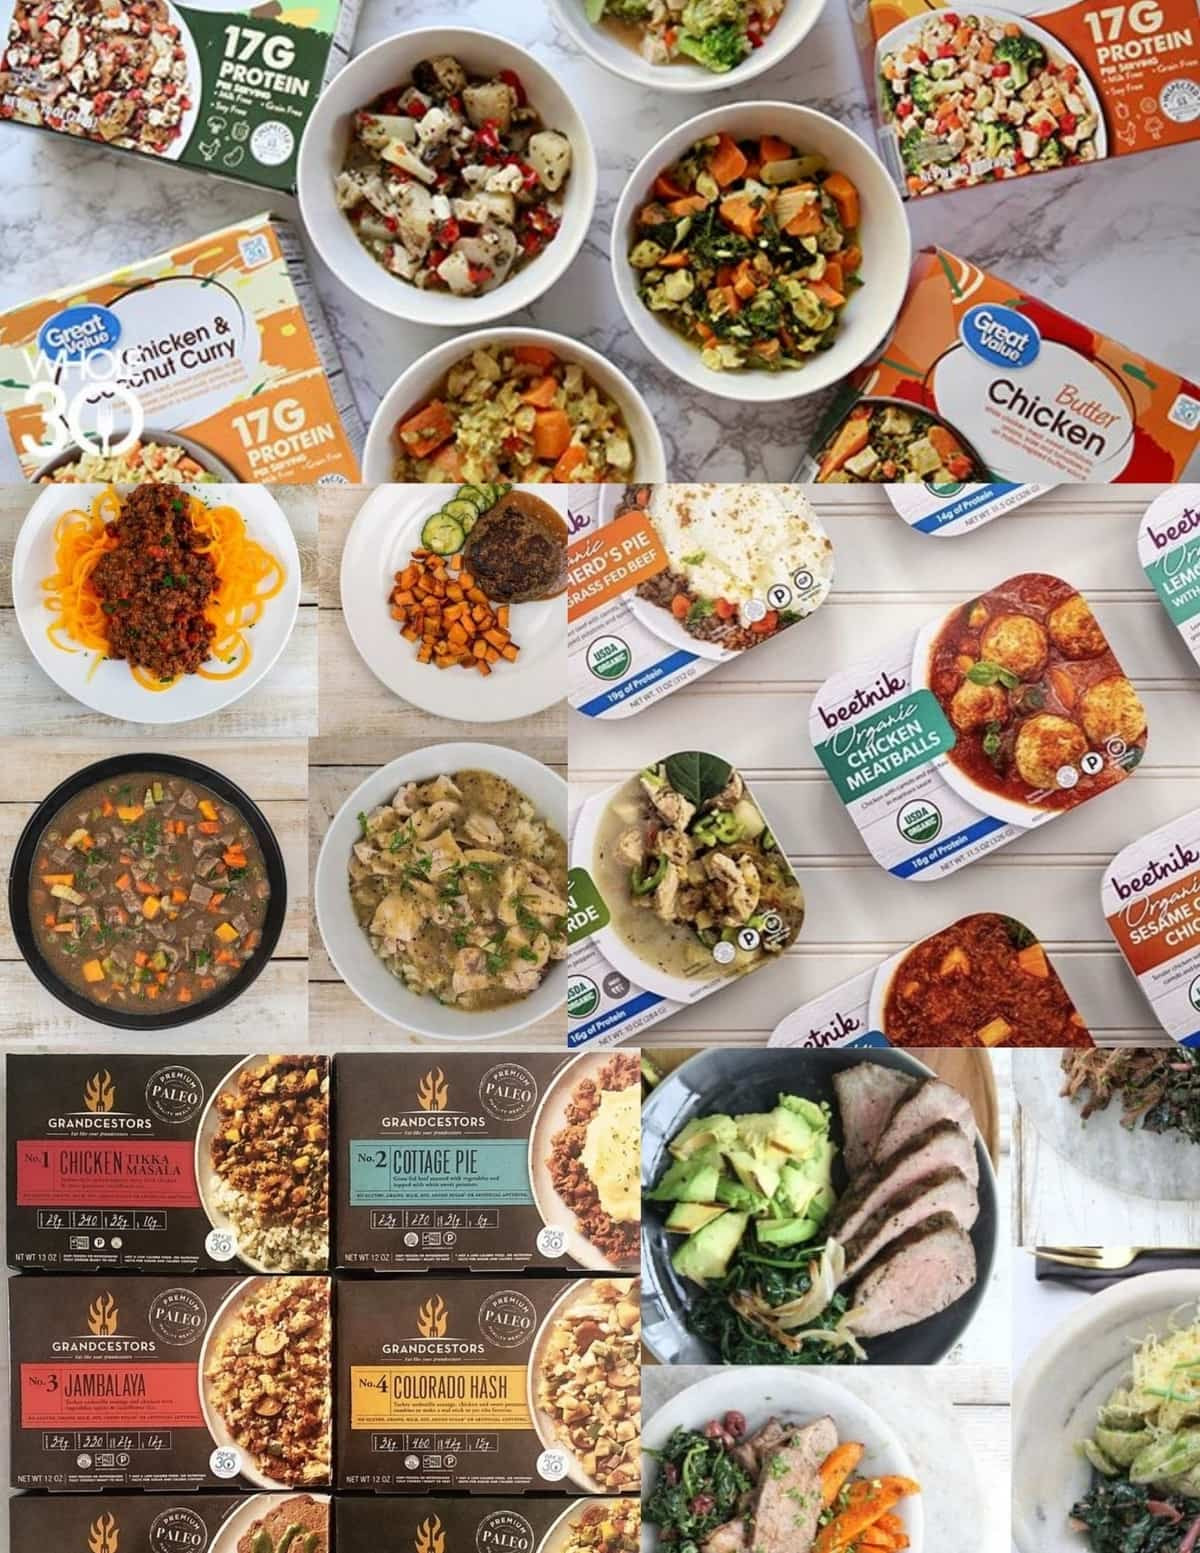 Paleo Frozen Dinners
 Whole30 & Paleo Frozen Meals with Prices Cook At Home Mom